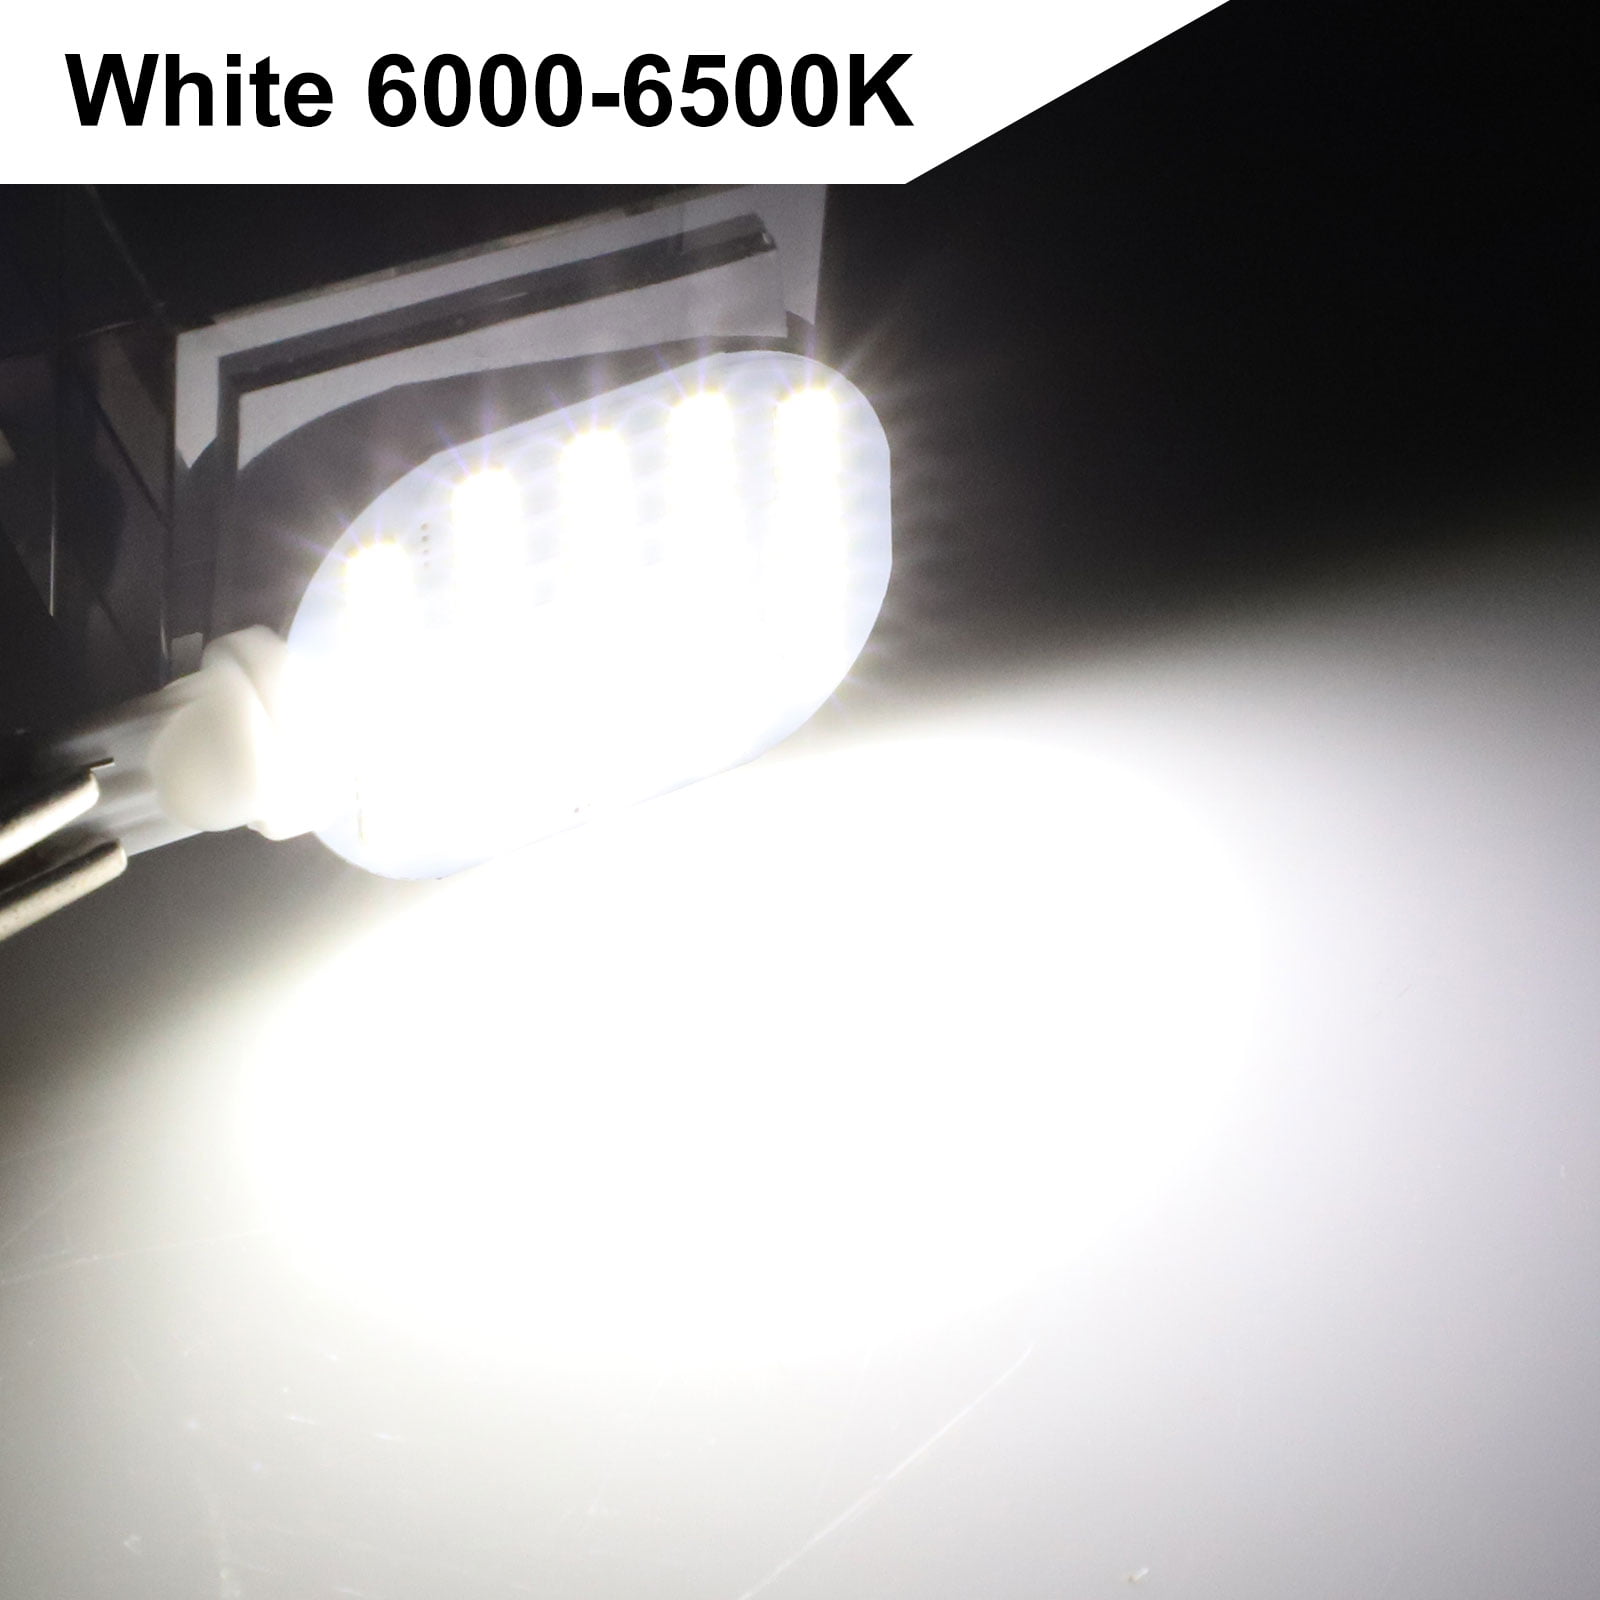 Super bright 921 led bulbs 38-smd for rv Trailer Camper Motorhome Boat Ceiling Dome Interior Light,Pack of 20,6000K White 